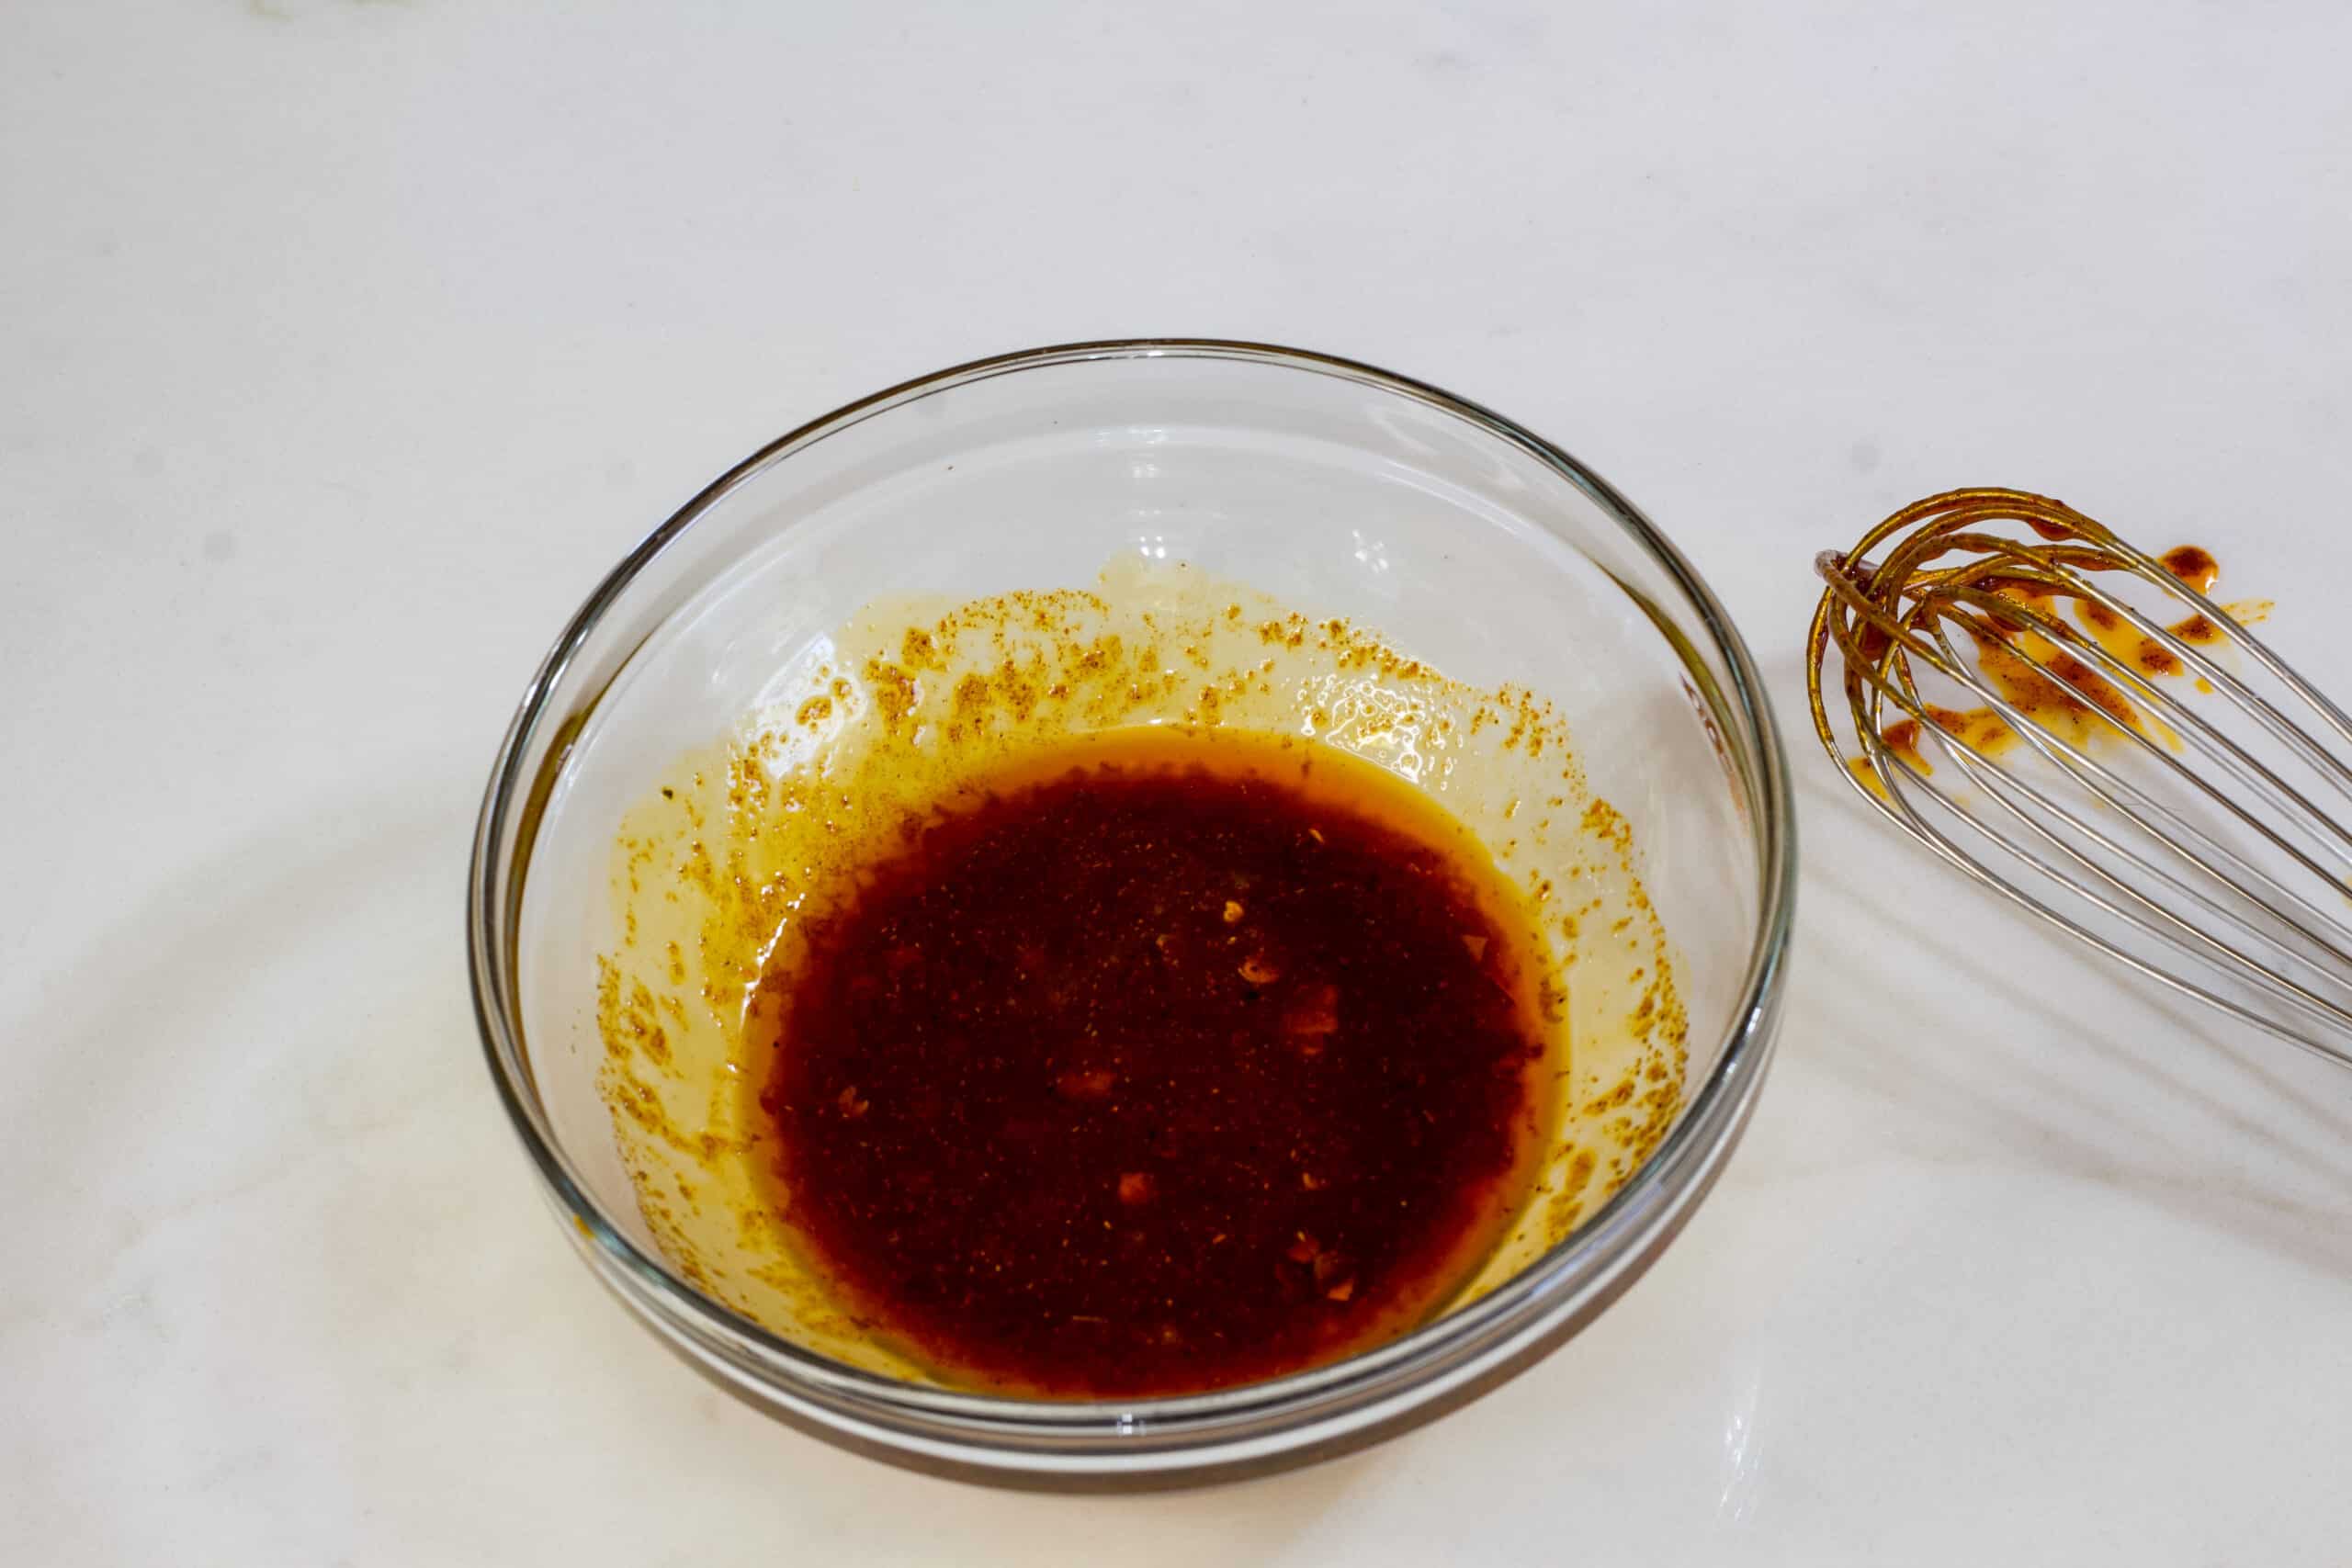 The spicy sauce in a small glass bowl with a whisk on the counter next to it.